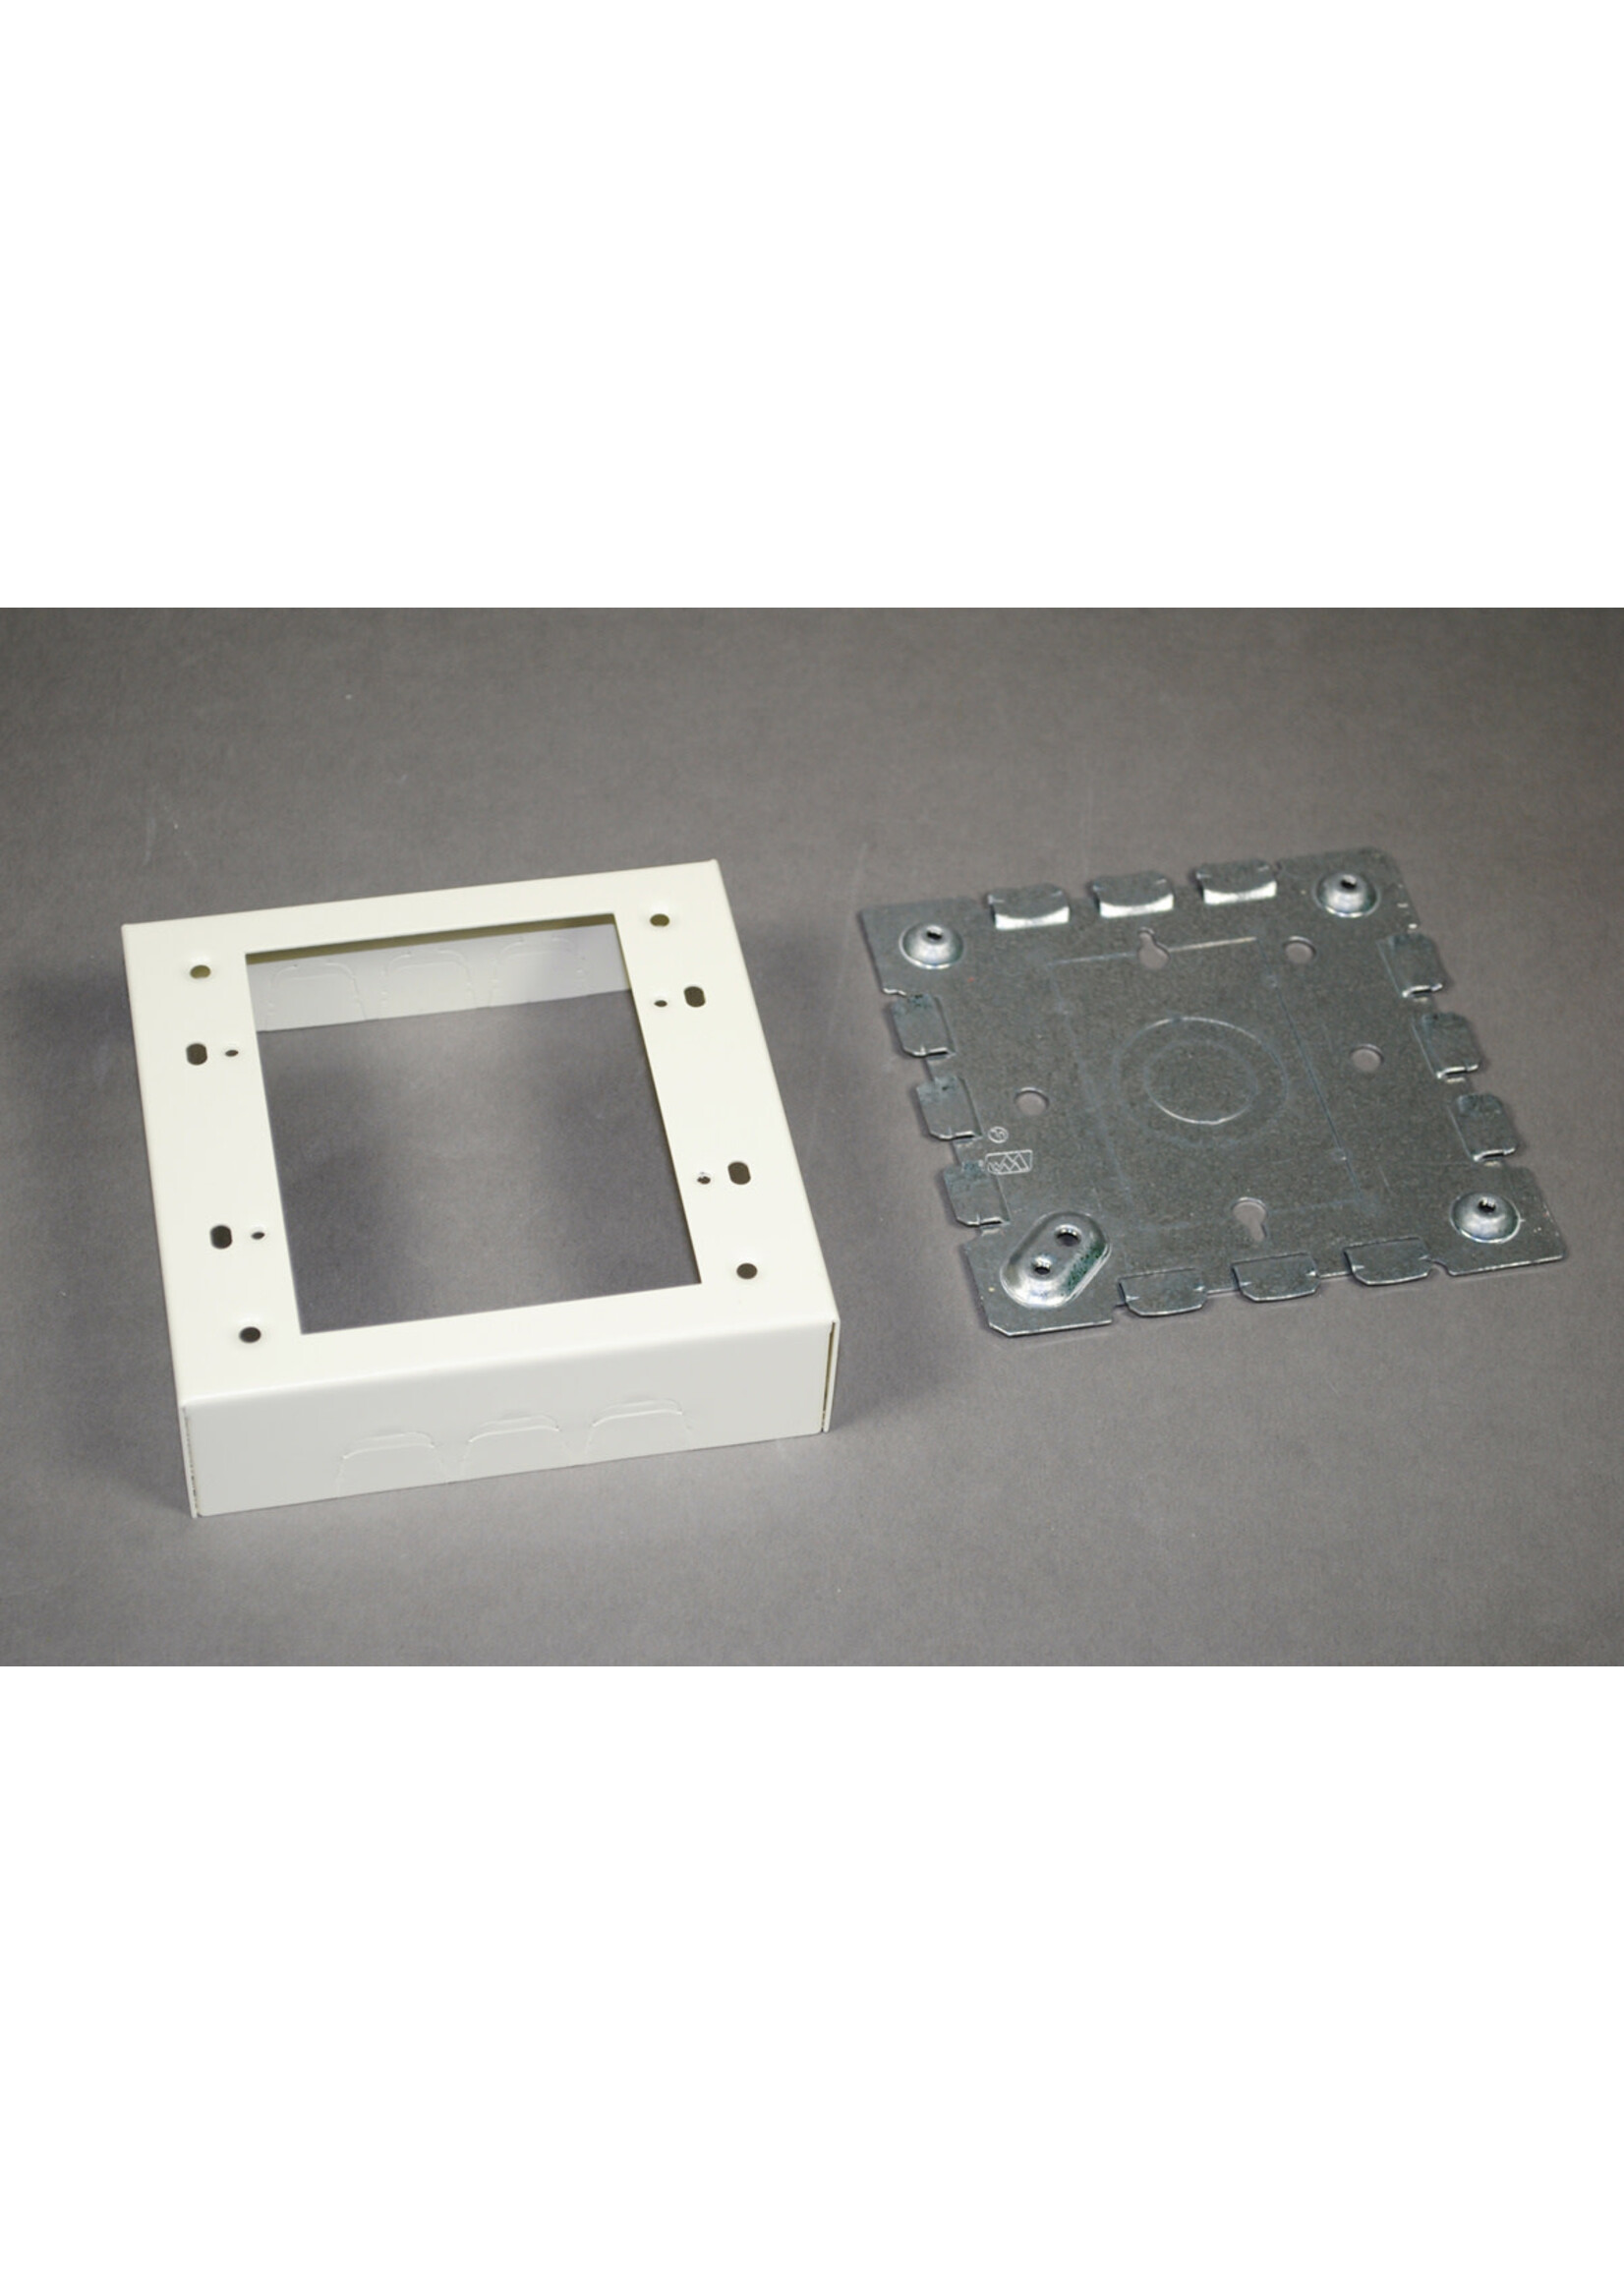 LEGRAND / WIREMOLD 15-V5747-2 SHALLOW SWITCH & RECEPTACLE BOX WIREMOLD IVORY